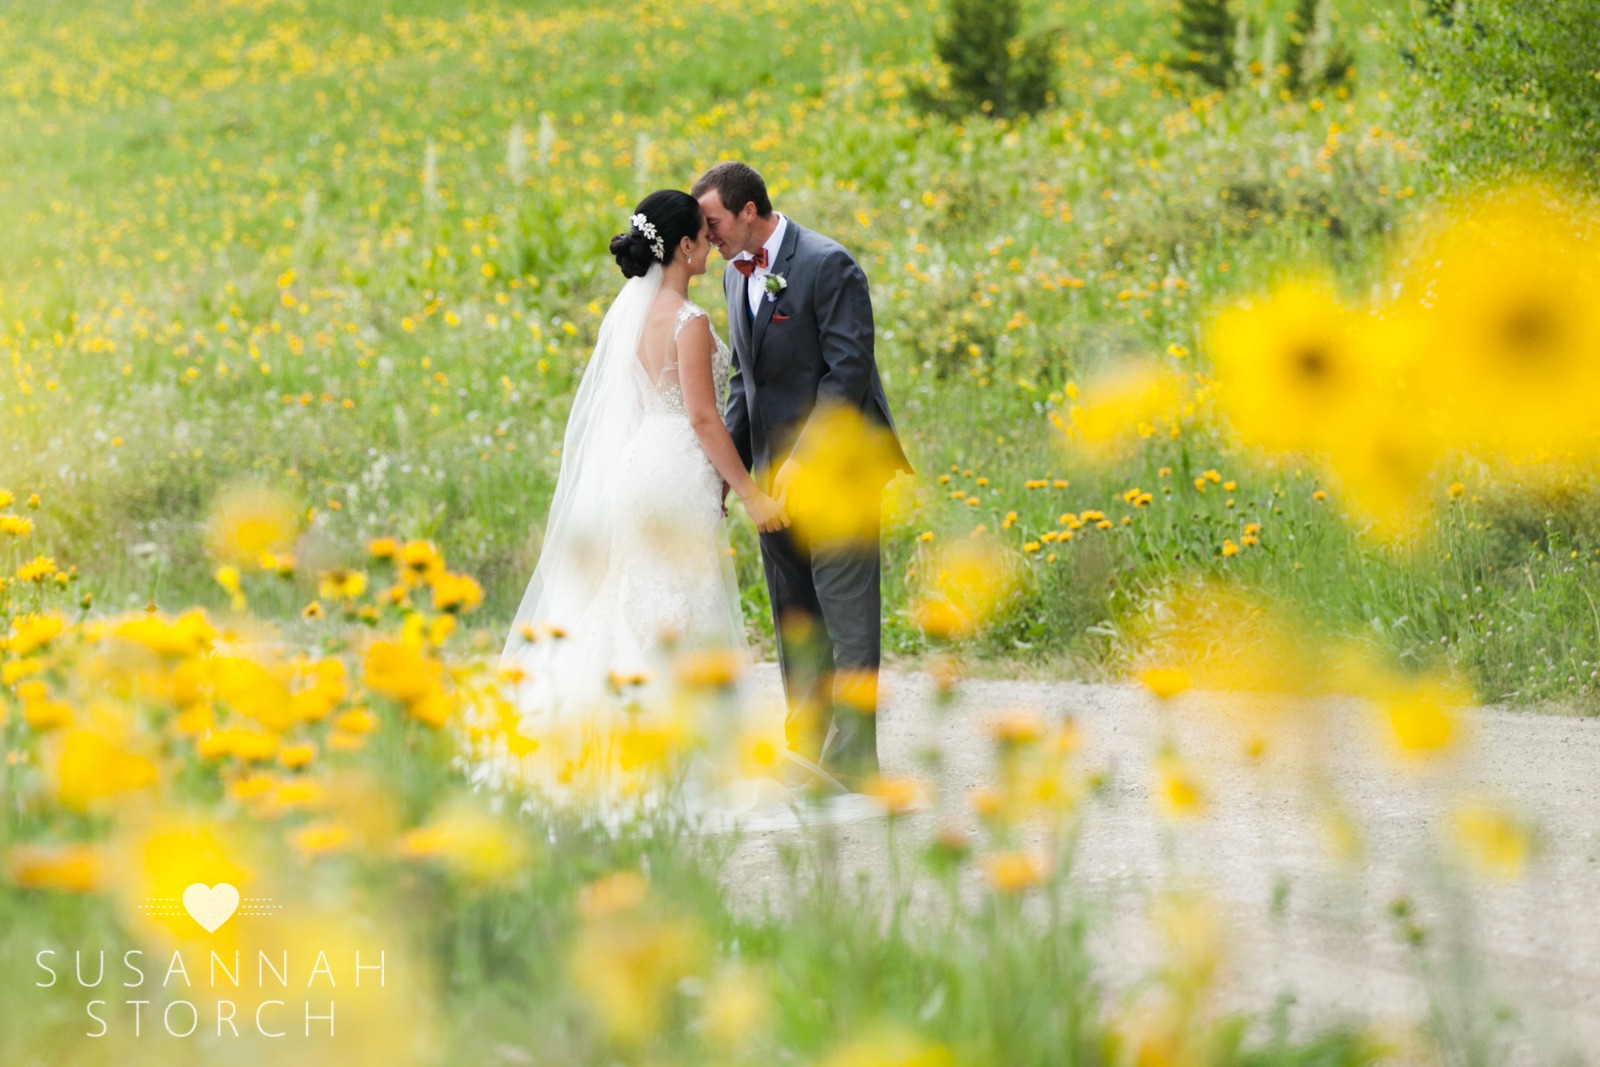 yellow flowers surround a kissing wedding couple